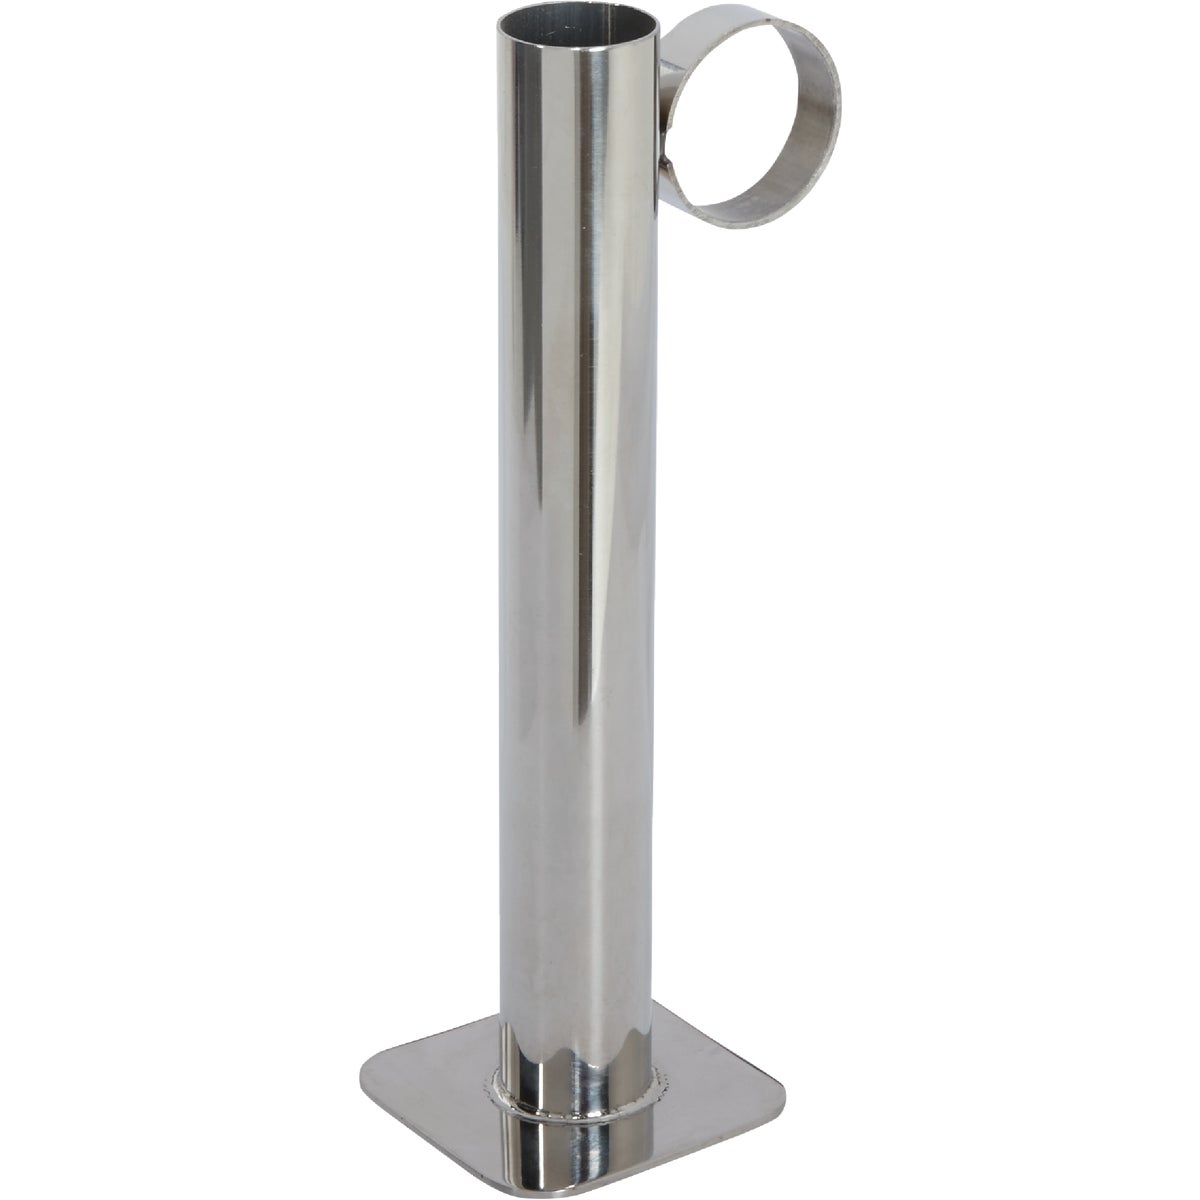 Item 704690, Stainless steel hydrometer test cup.